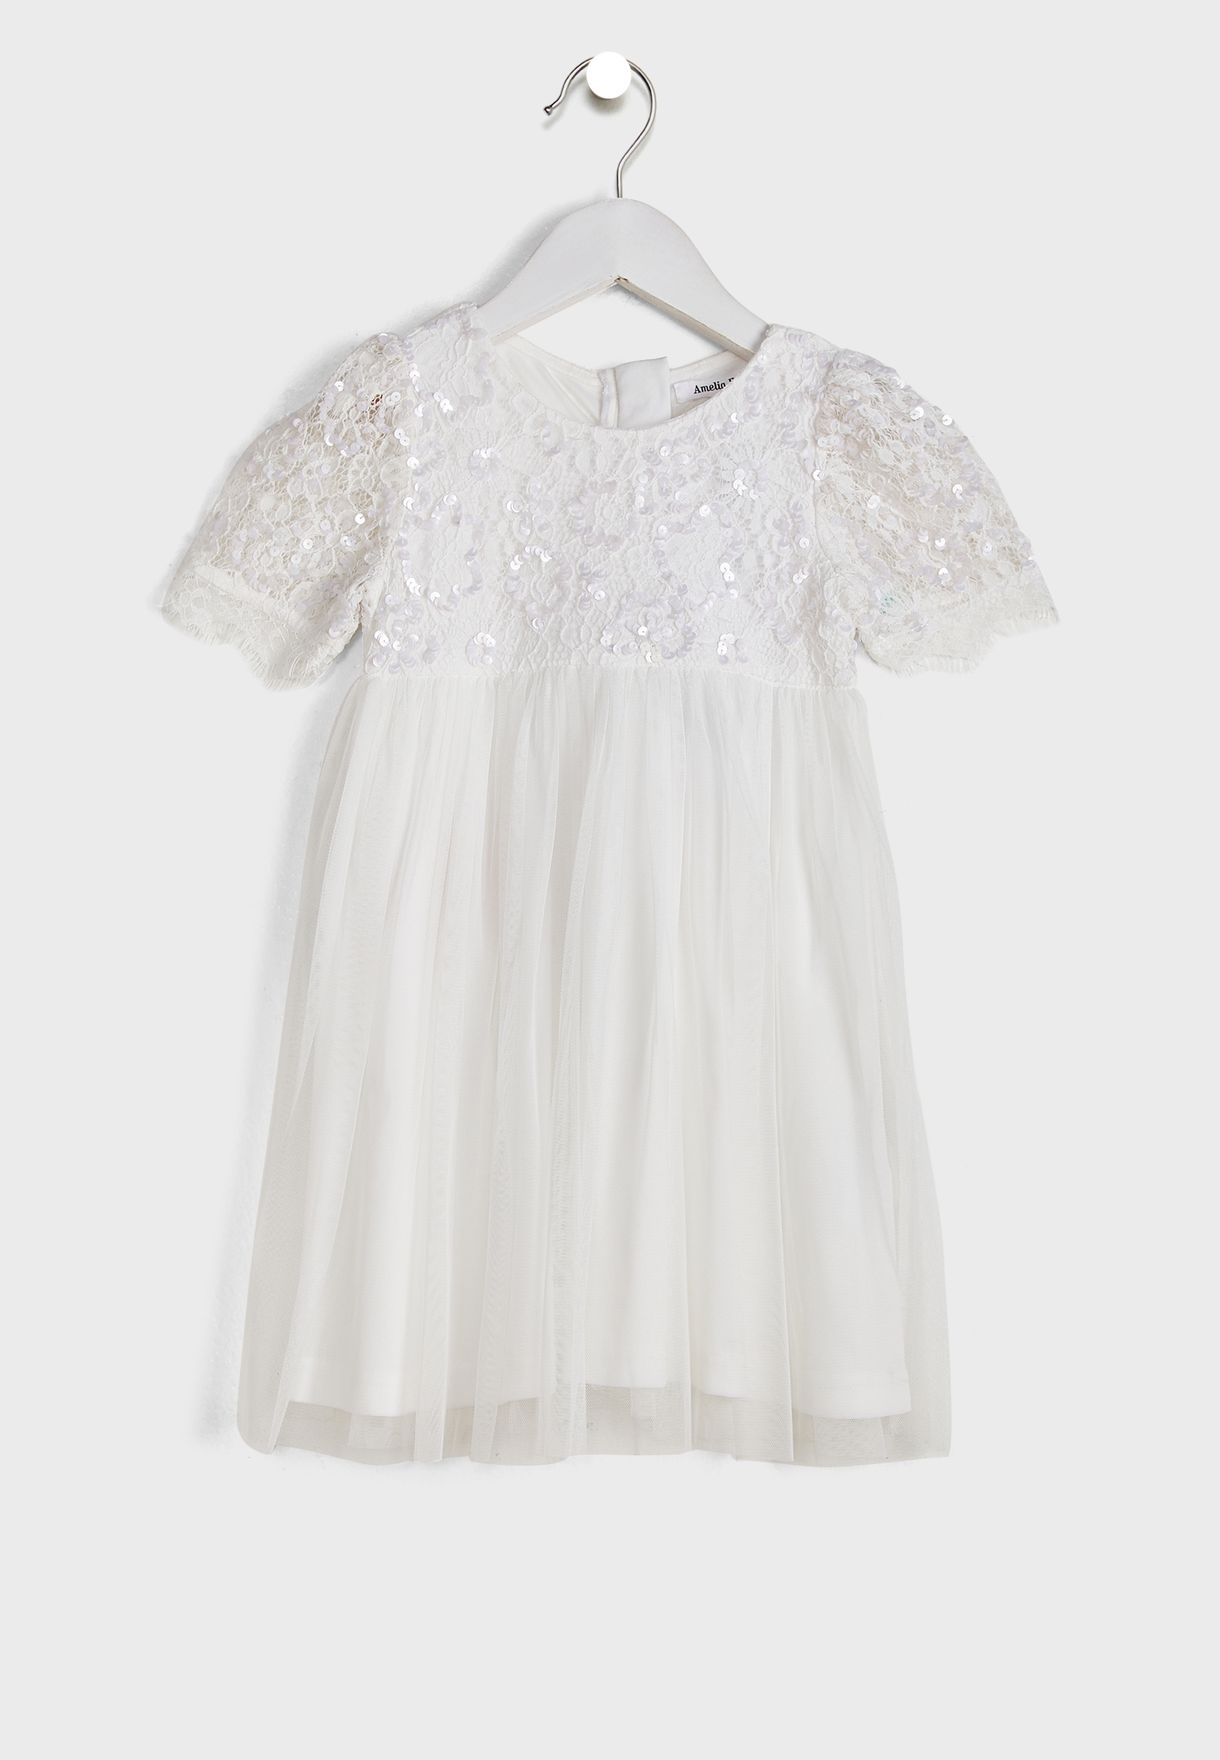 Youth Sequin And Lace Party Dress